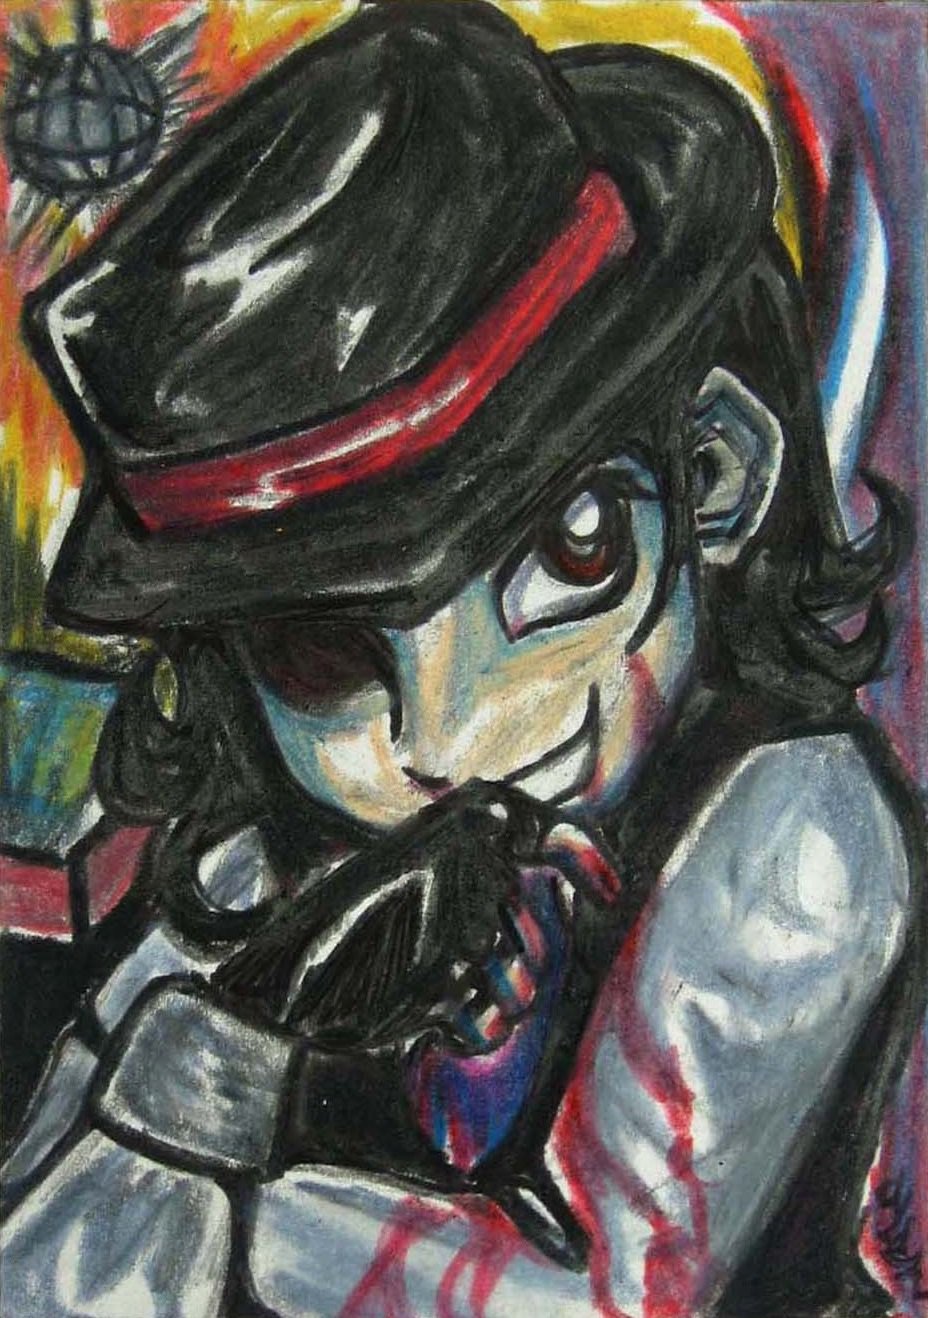 Original Concept Art "Twinkles" Creepy Dark Horror Sketch Card Drawing ACEO PSC 1/1 by Maia